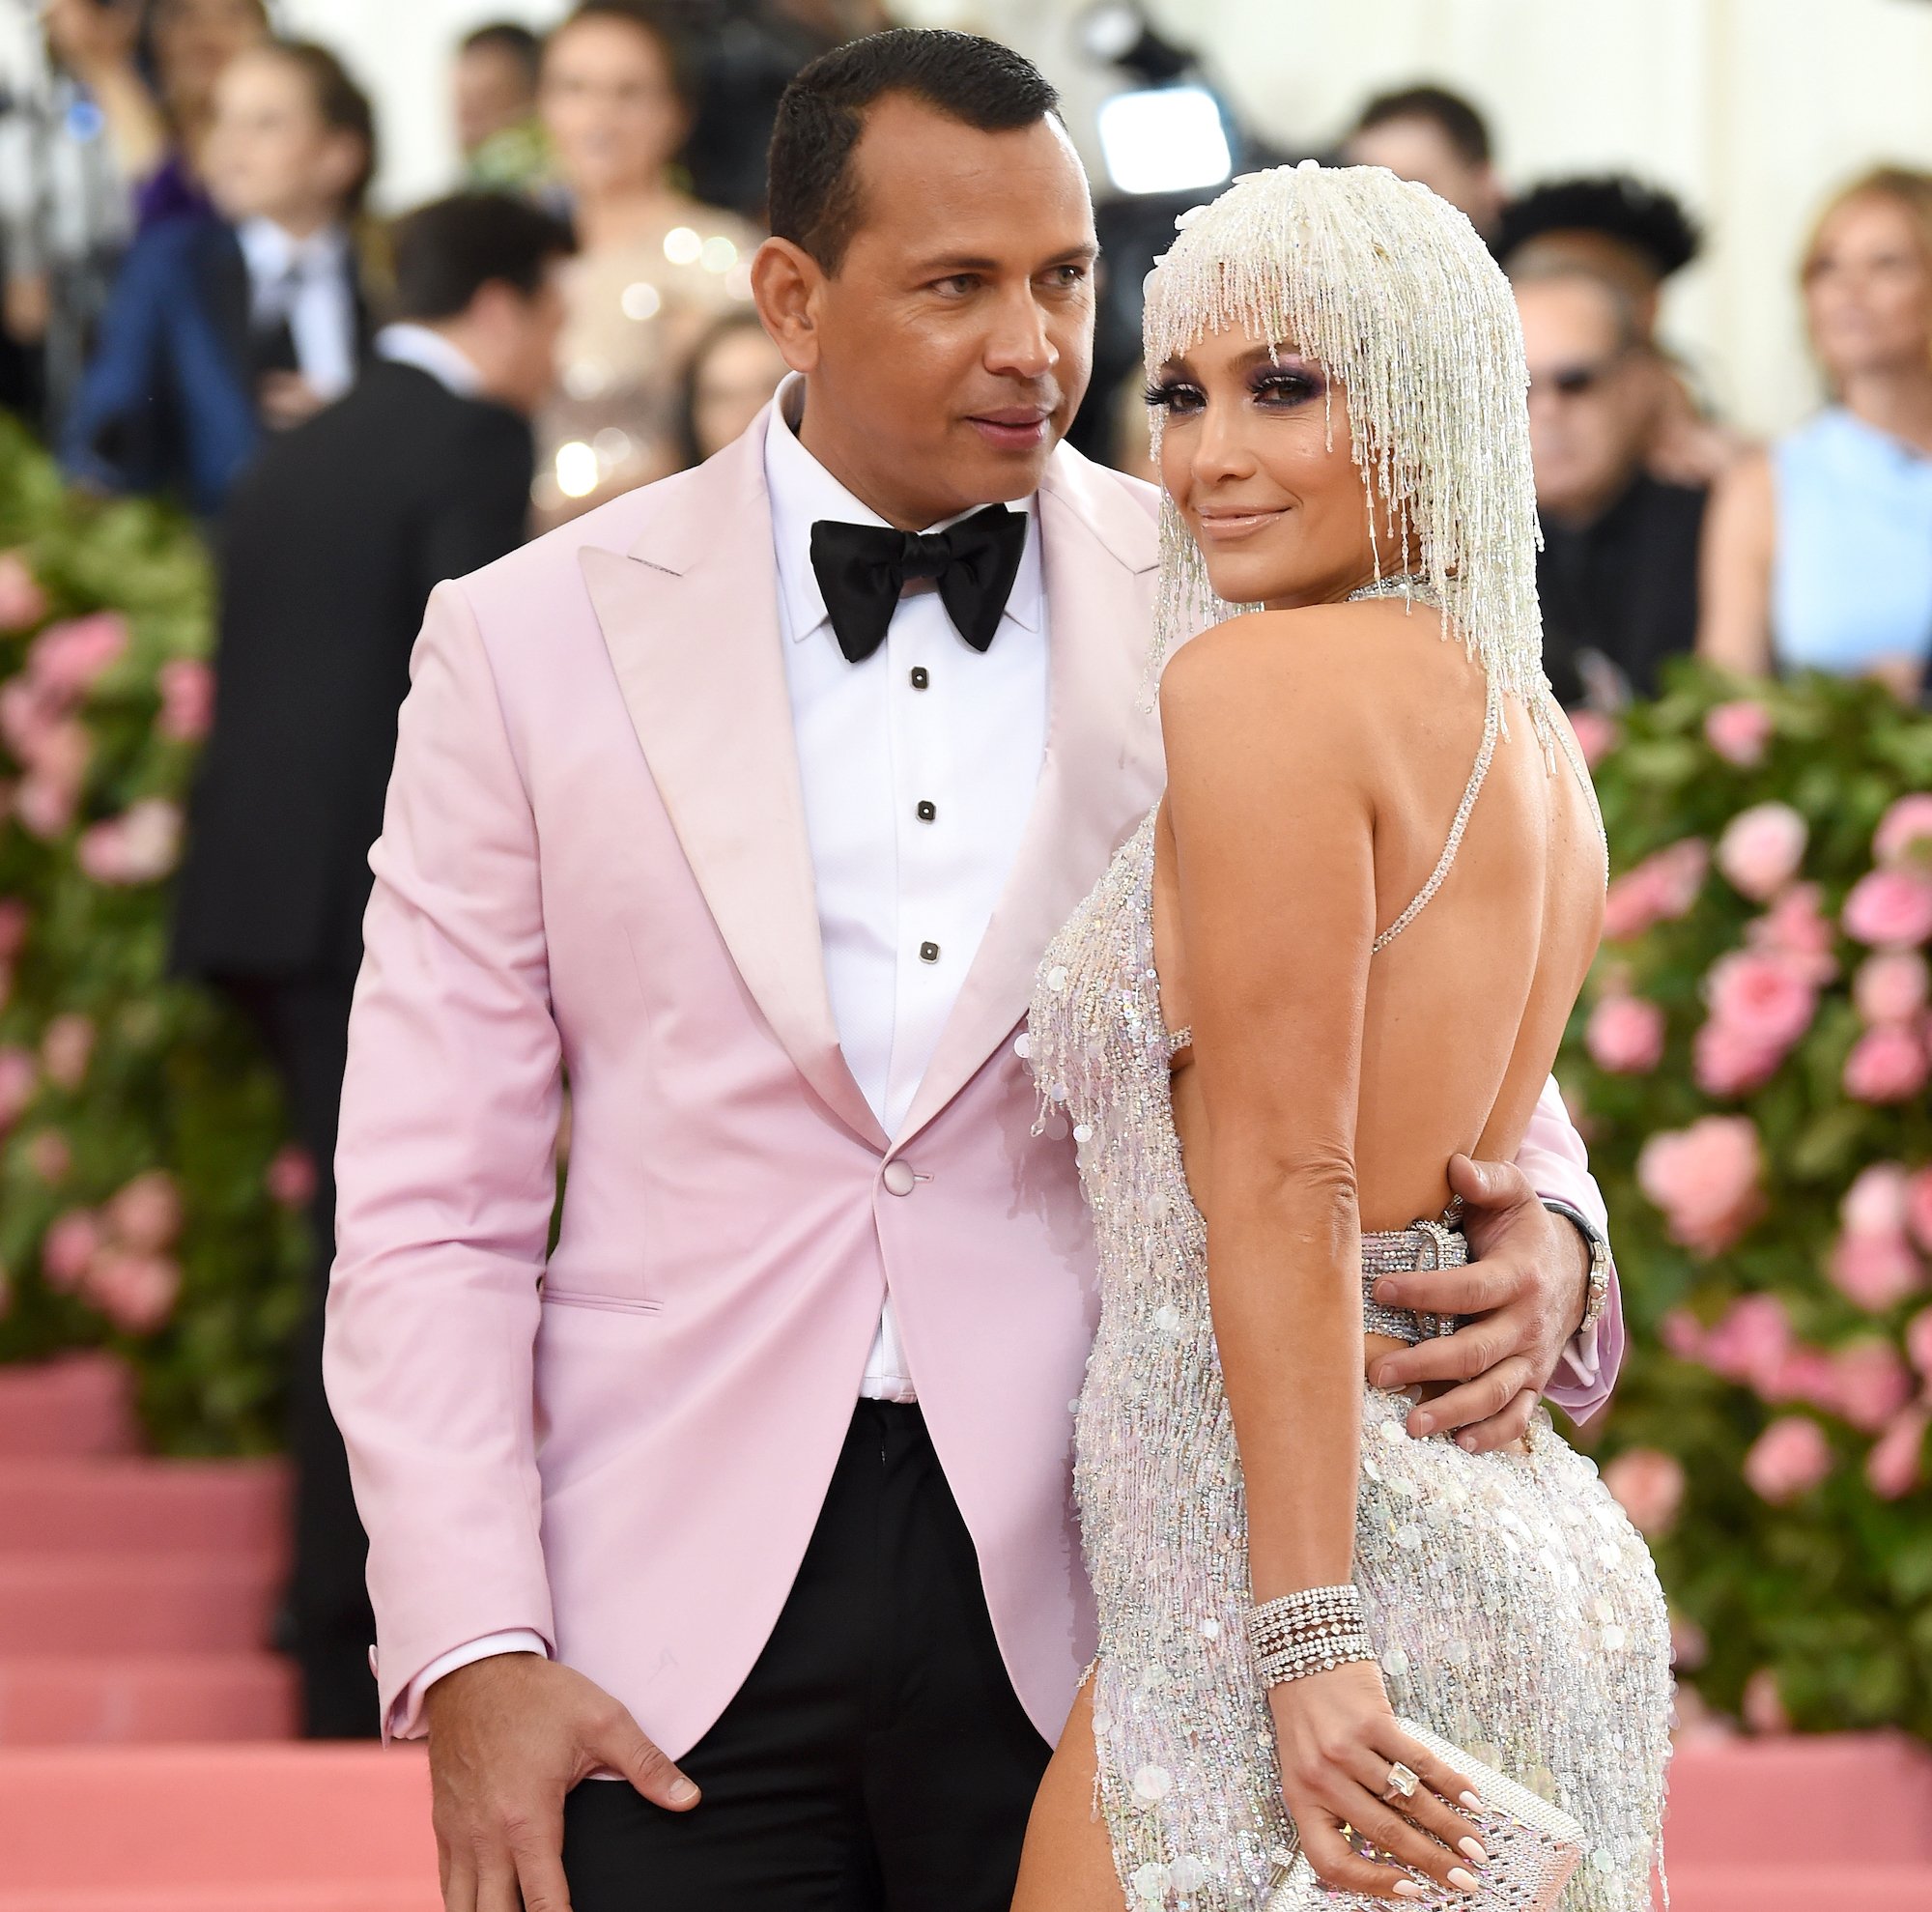 Alex Rodriguez and Jennifer Lopez at the 2019 Met Gala